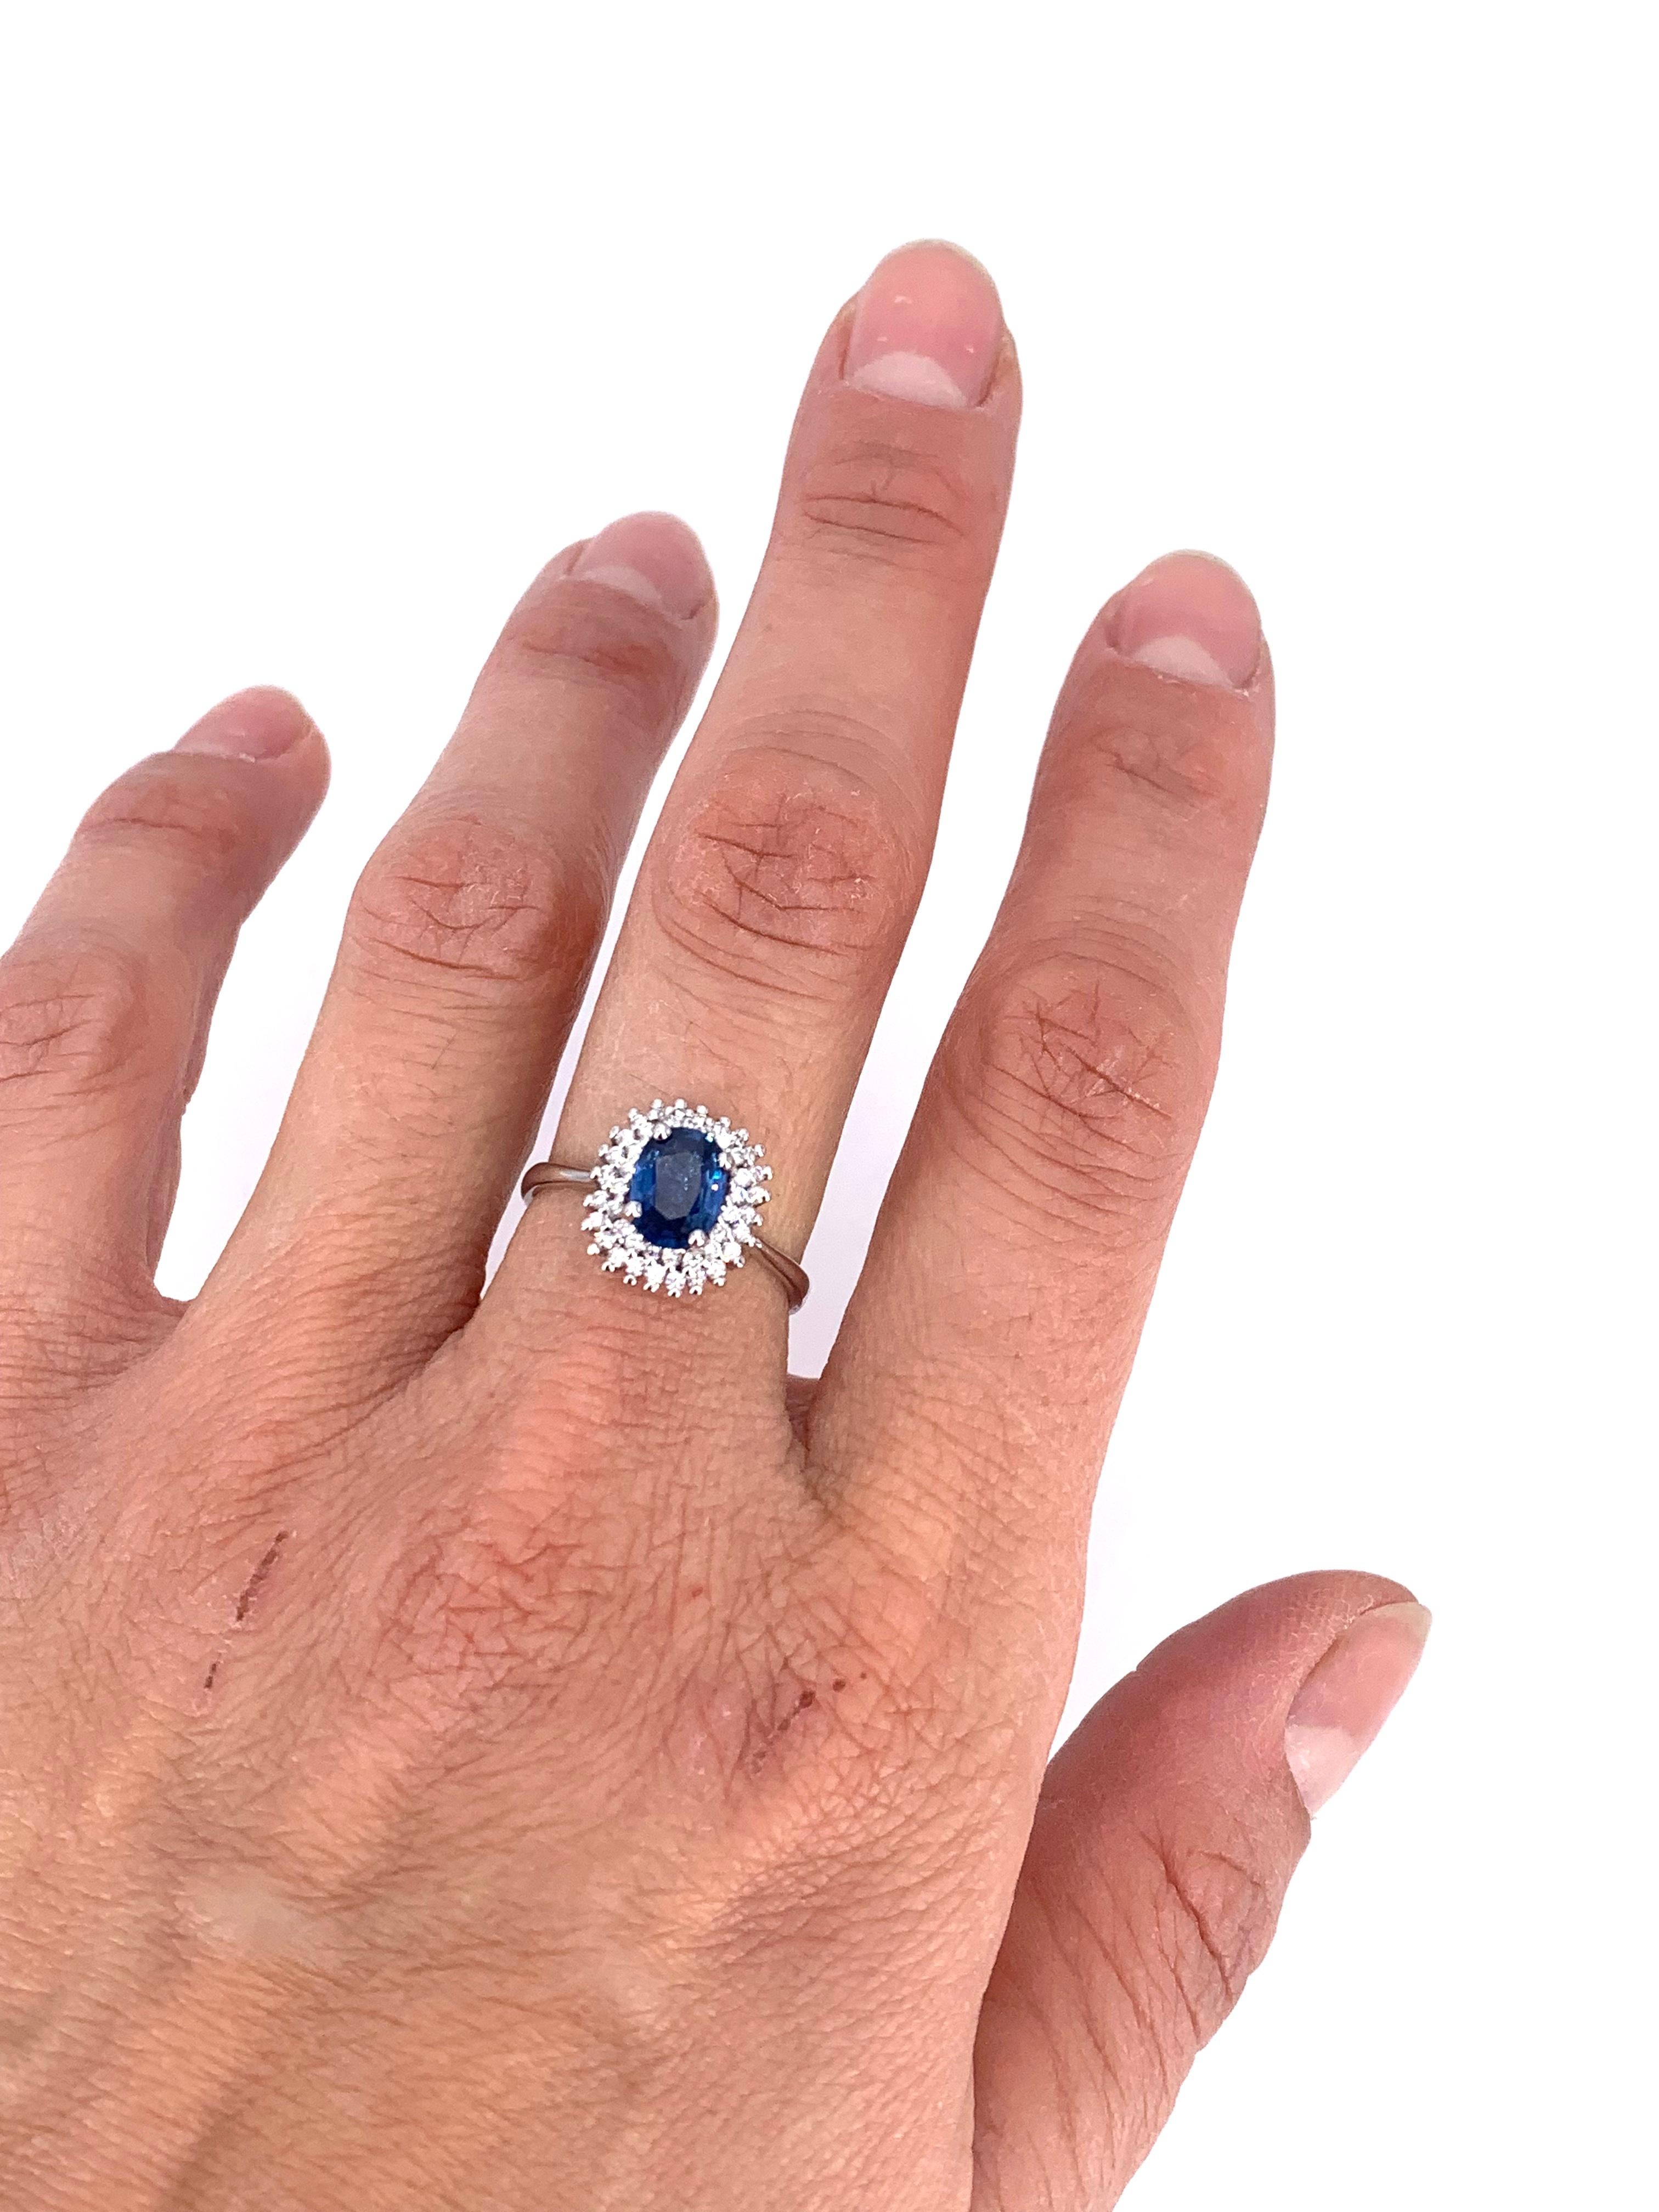 Contemporary Double Halo 1.12 Carat Sapphire & 0.34 Carat Diamond Cocktail Ring For Sale 1